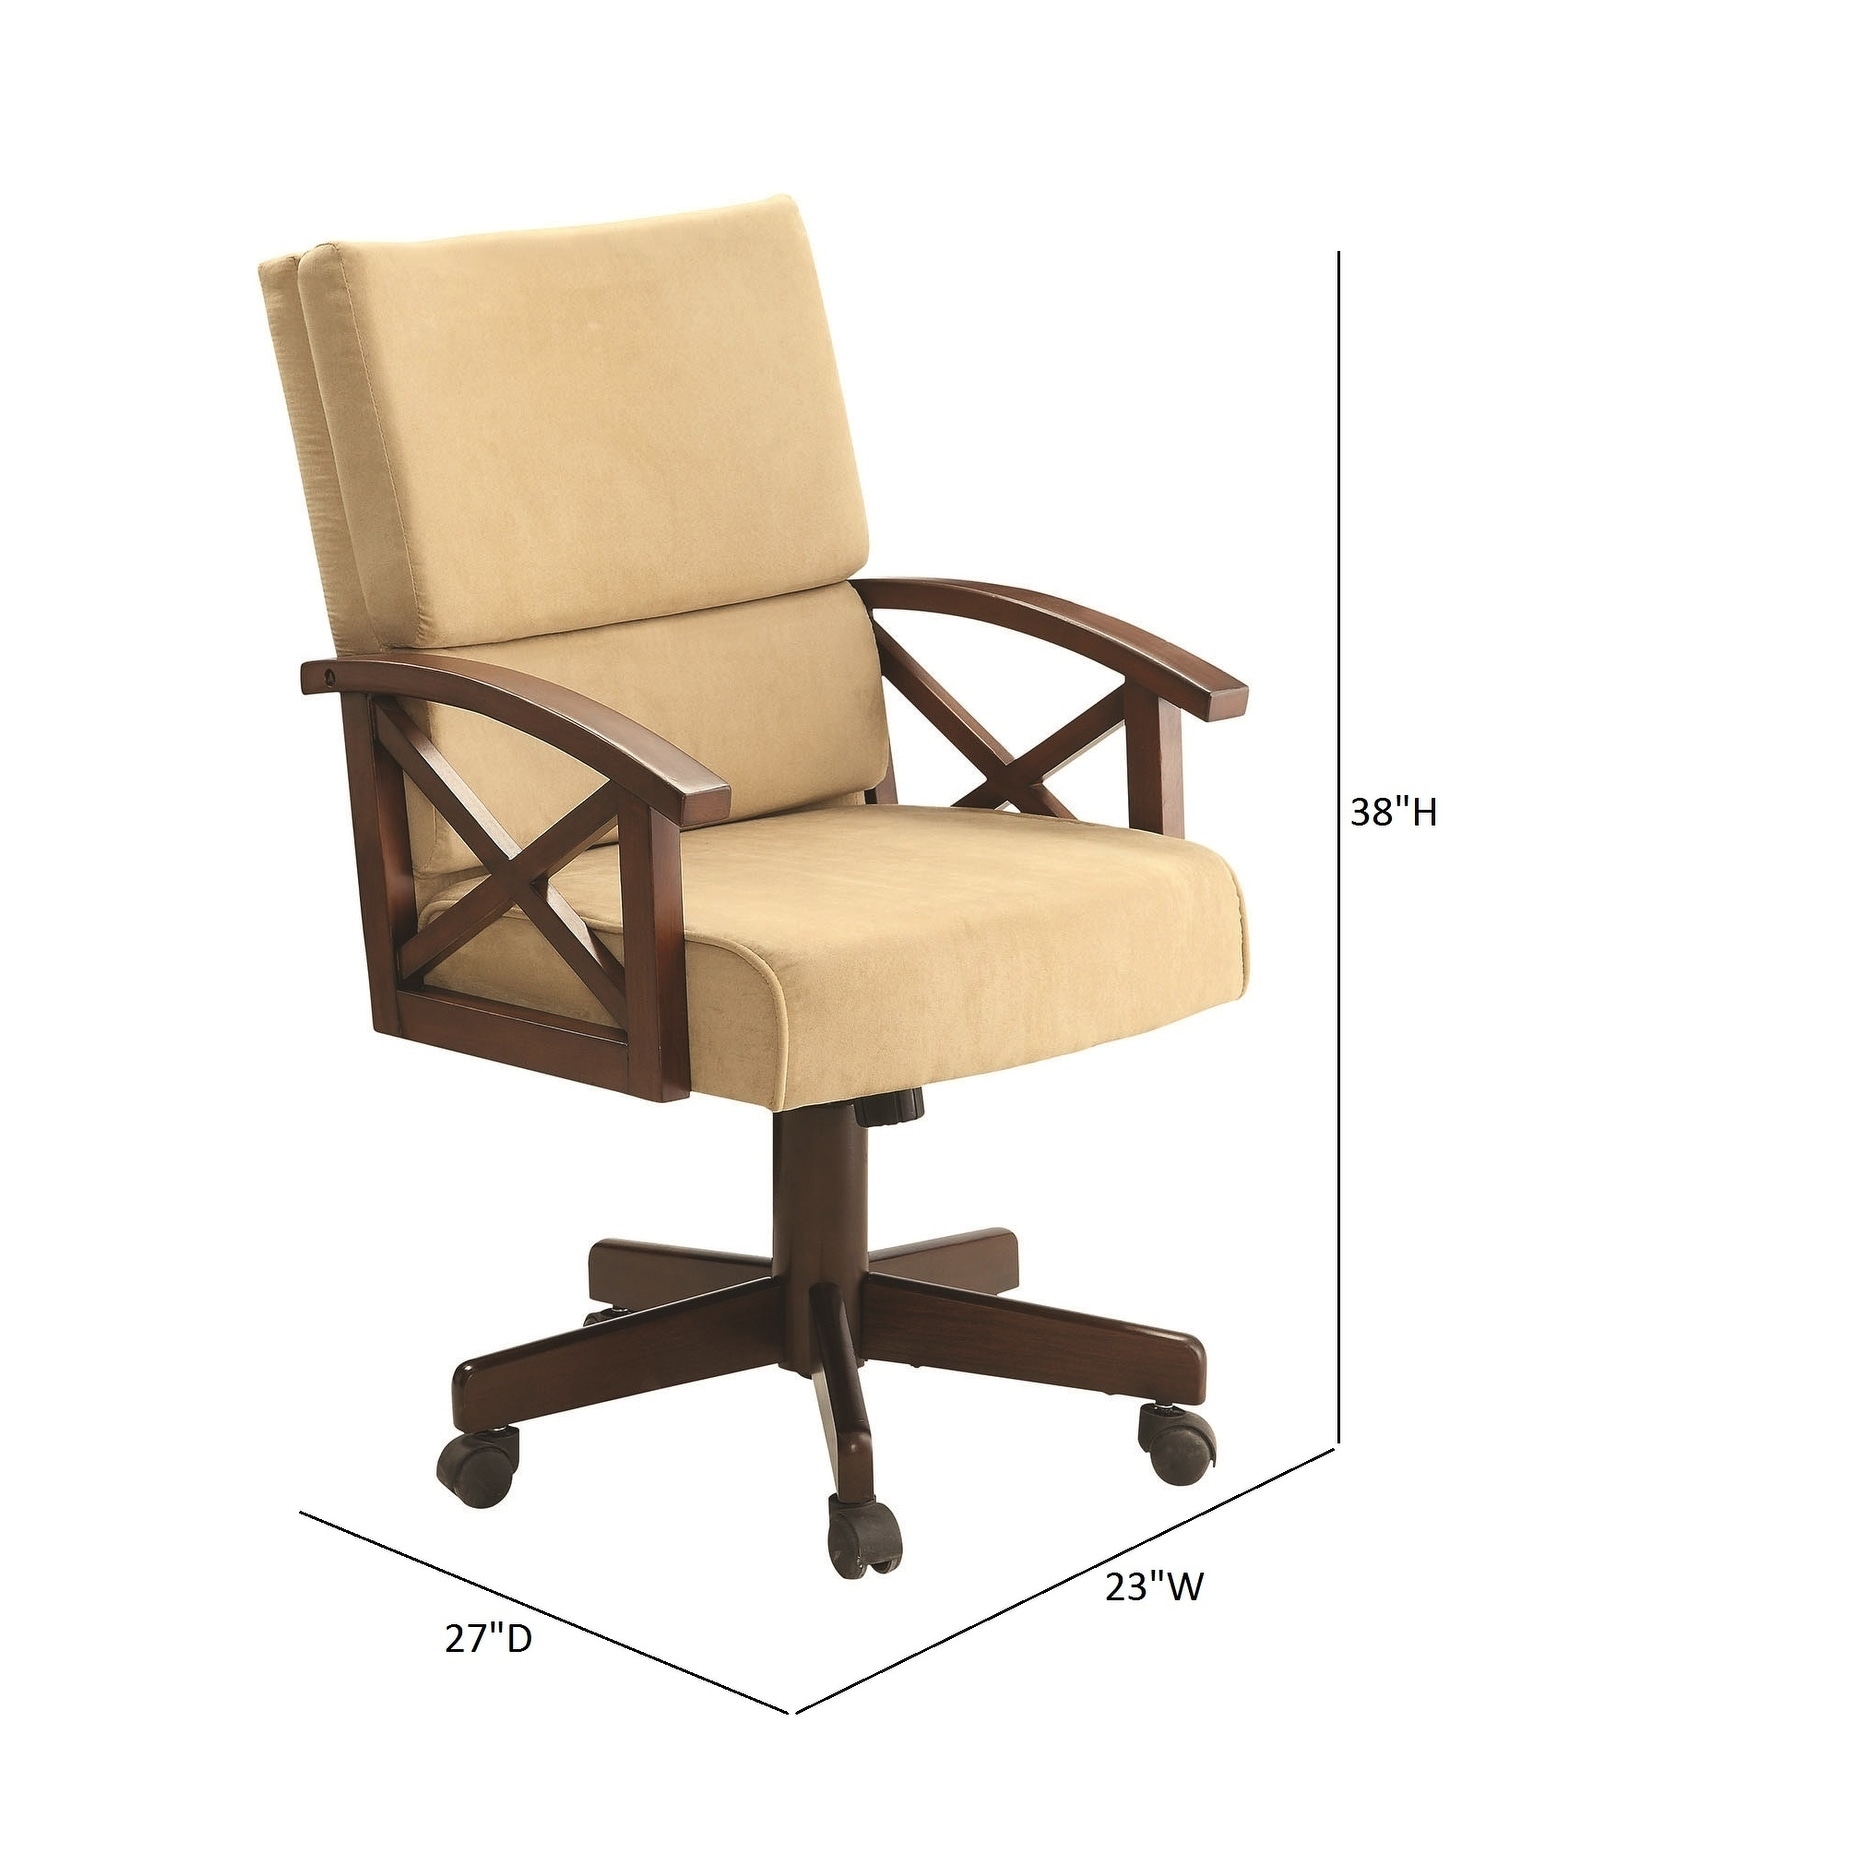 Coaster Furniture Marietta Tobacco and Tan Upholstered Game Chair